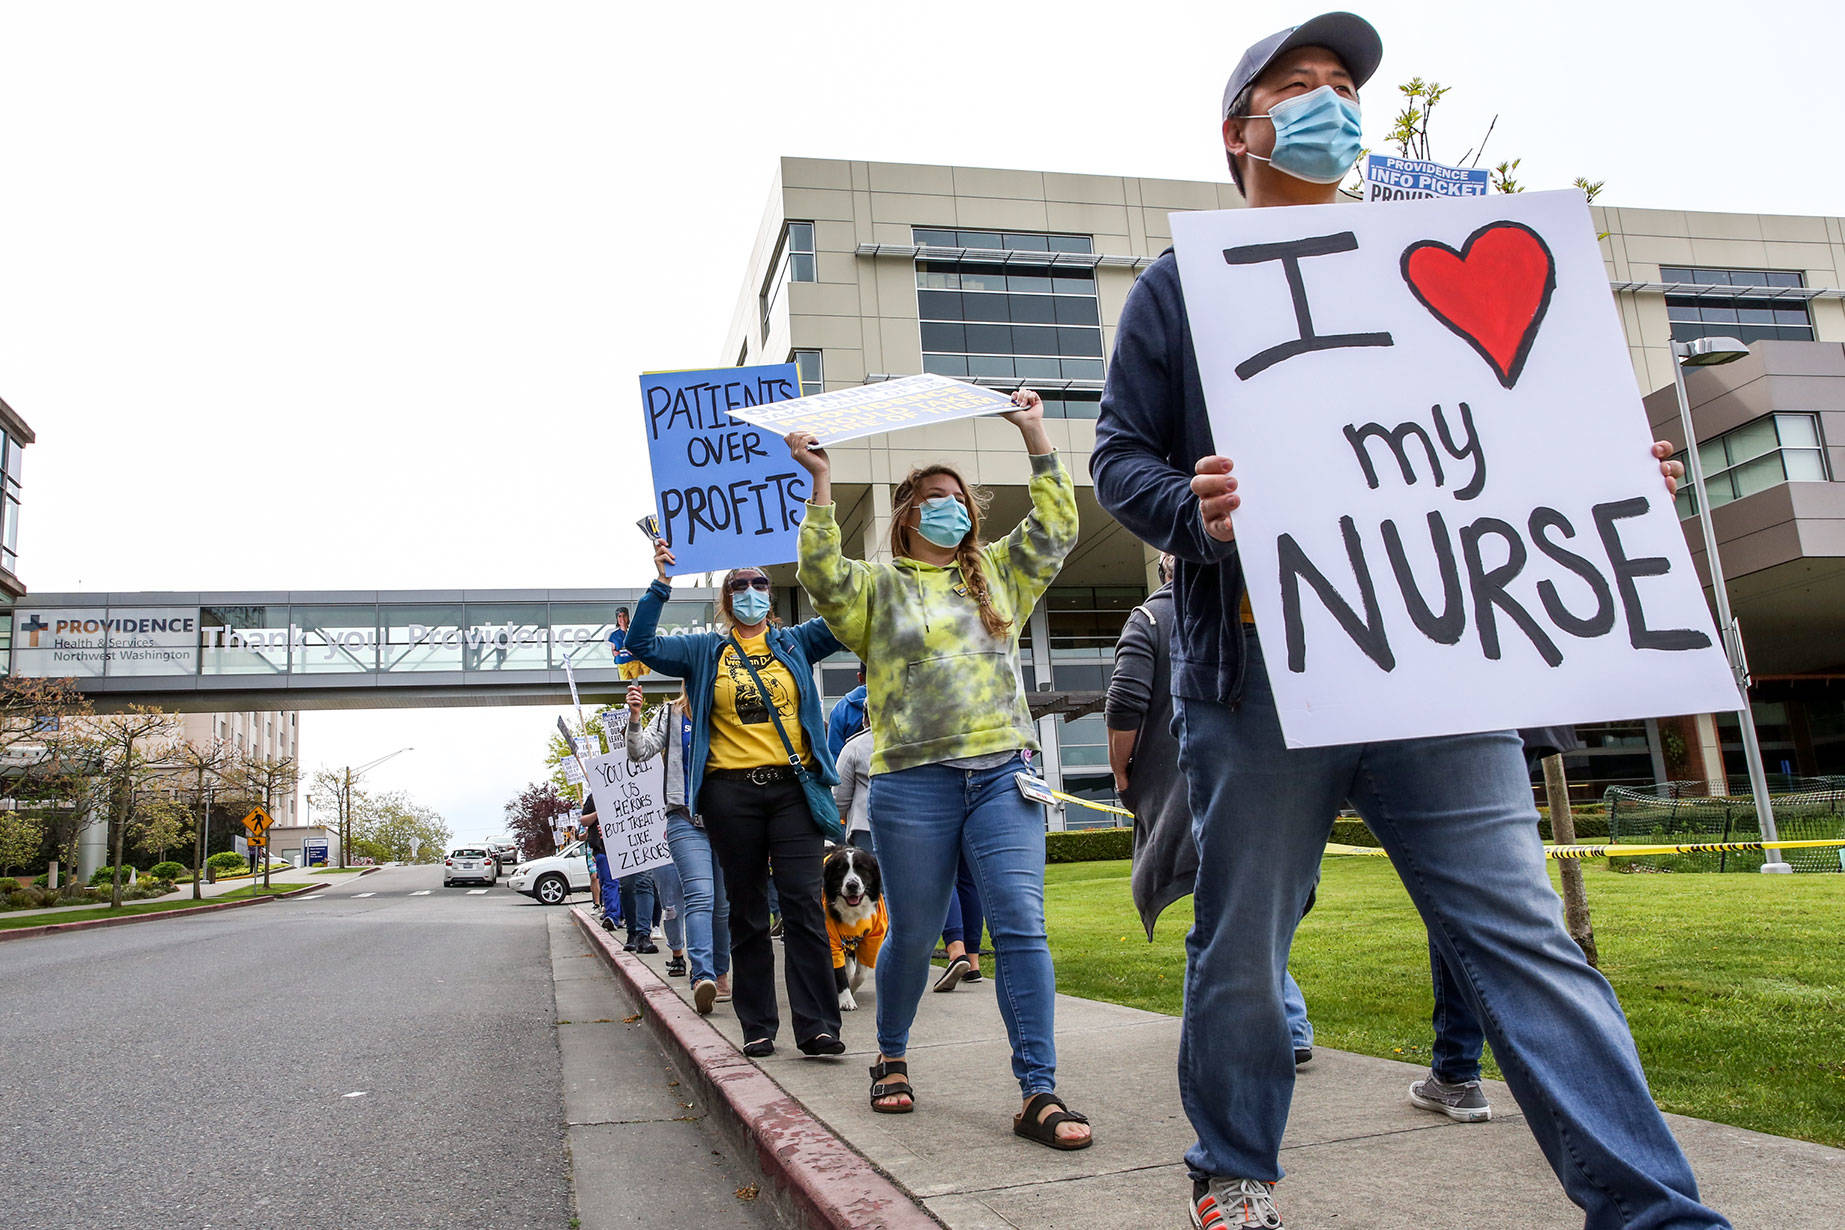 Supporters march Wednesday afternoon across from Providence Medical Center in Everett on May 5, 2021. (Kevin Clark / The Herald)